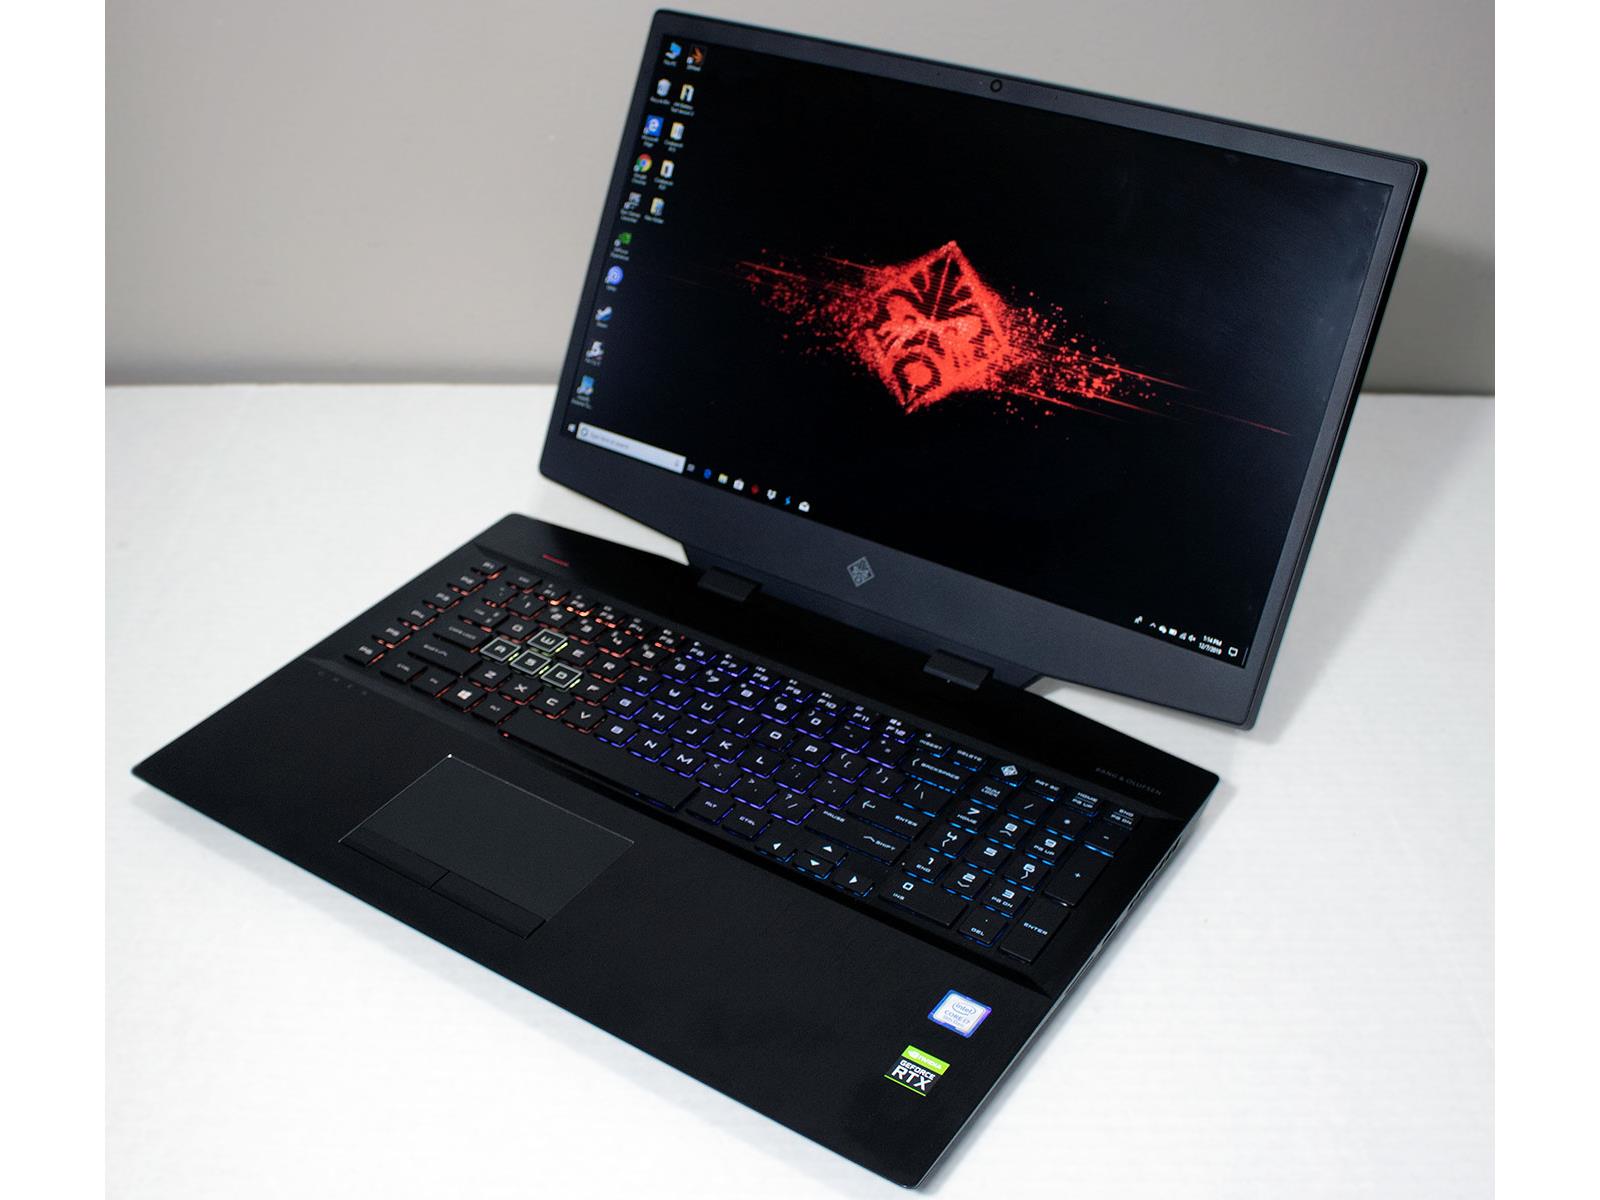 HP Omen 17 Review: A Value-Priced Mobile Gaming Beast - Page 2